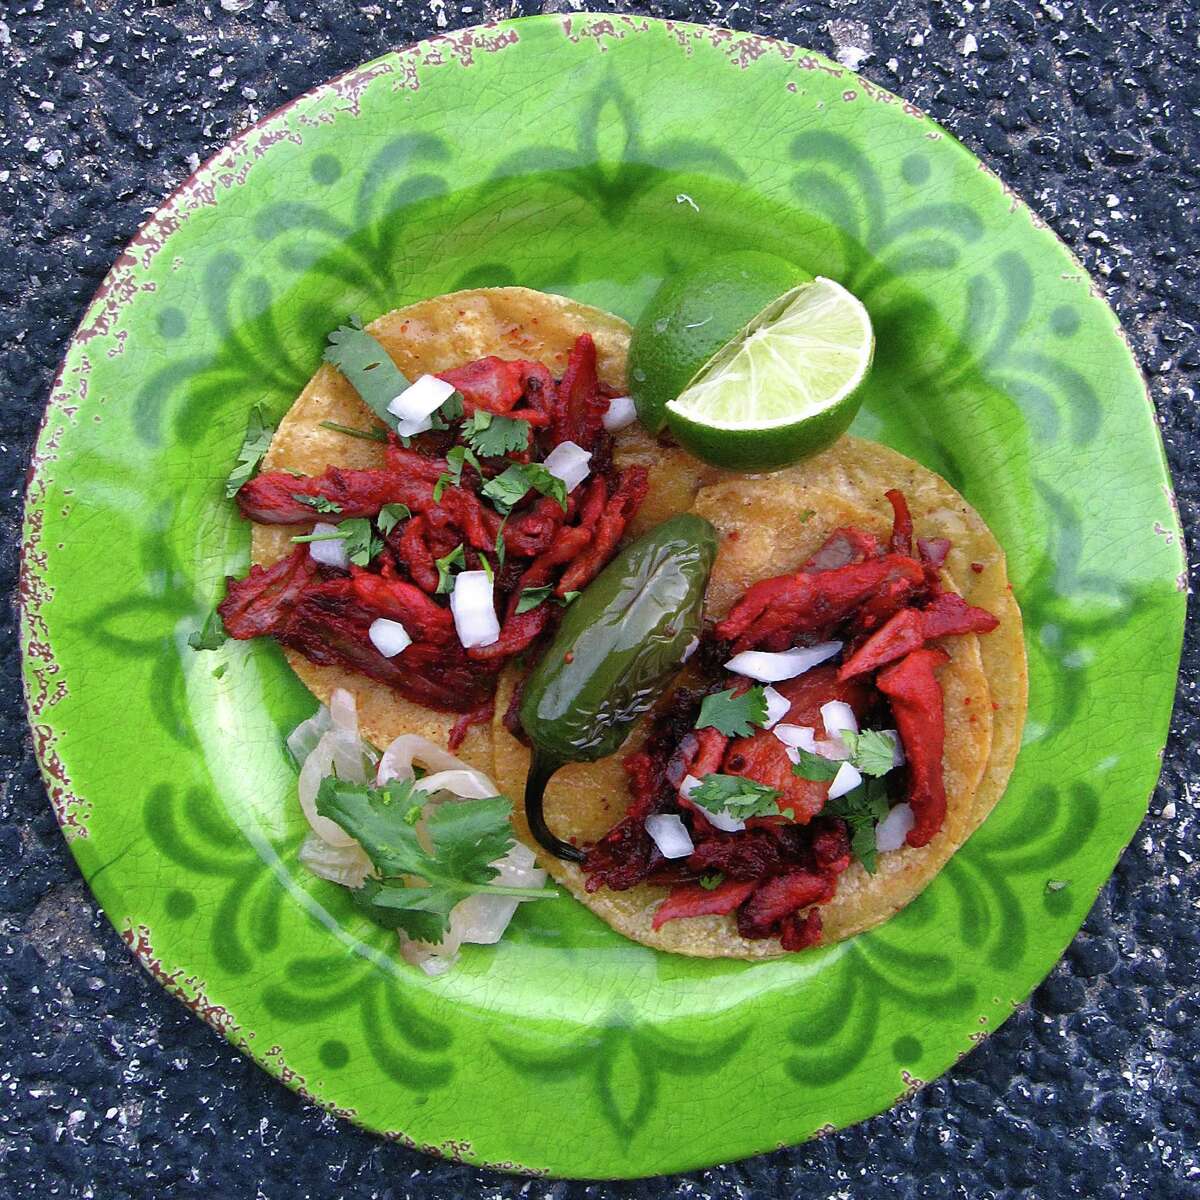 Taco of the Week: Al pastor mini-tacos on doubled-up corn tortillas from Tacos Beto's.